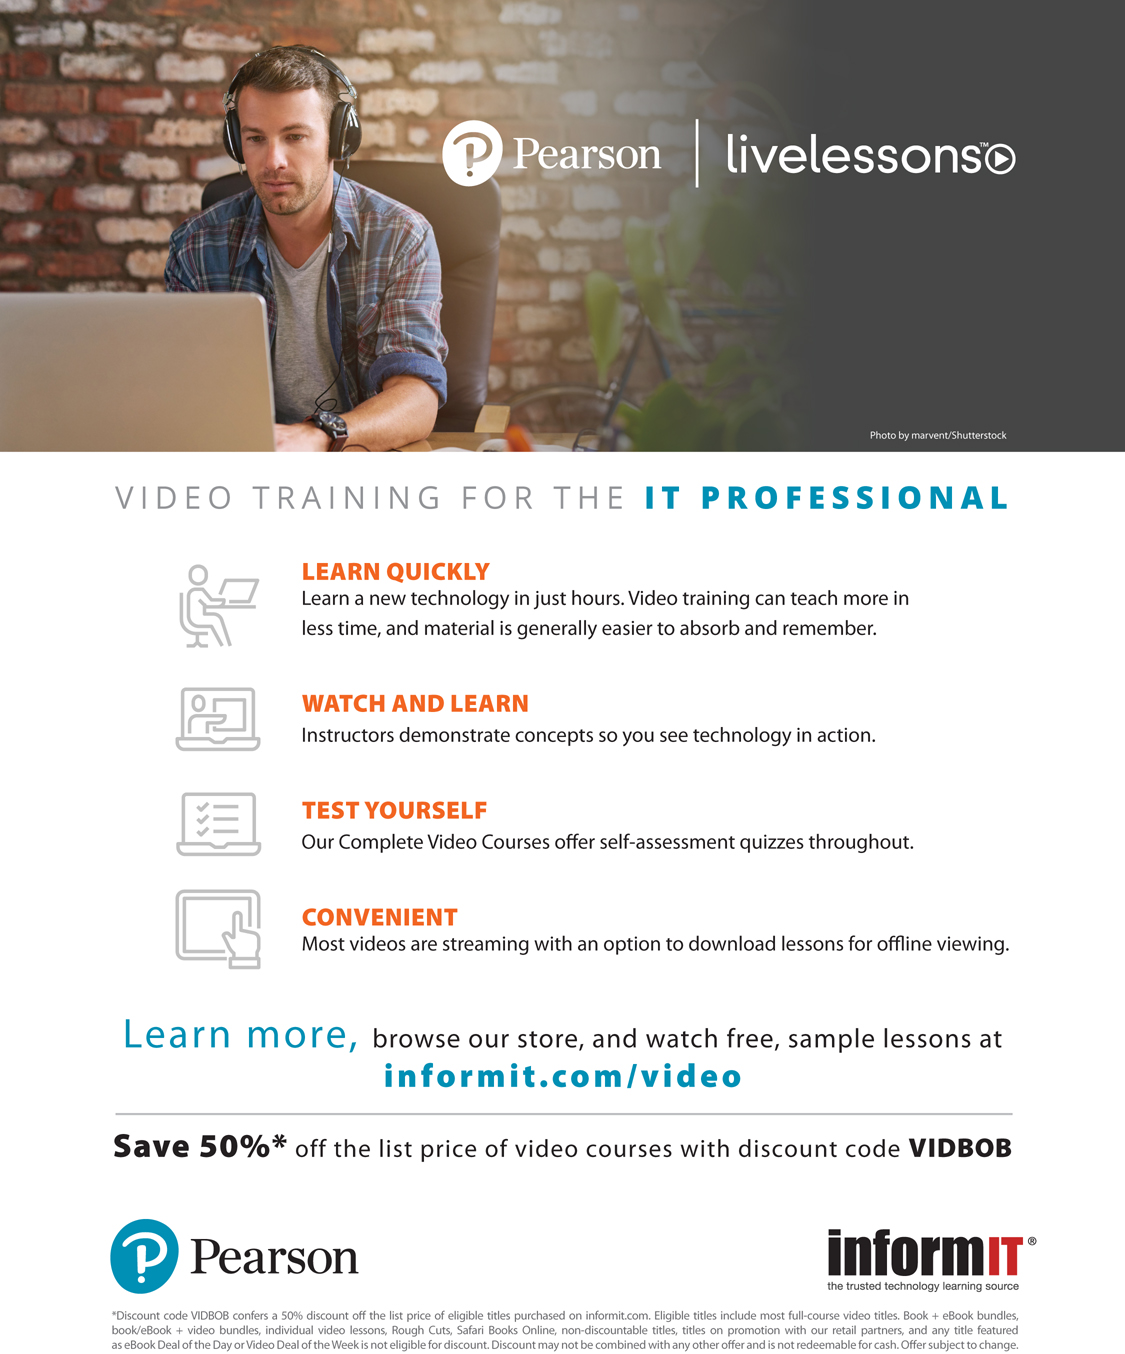 A snapshot shows information about Pearson "livelessons," video training for the IT professional. Features such as "learn quickly," "watch and learn," "test yourself," and "convenient" are listed. A discount code "VIDBOB" can be used to get a discount of 50 percent.